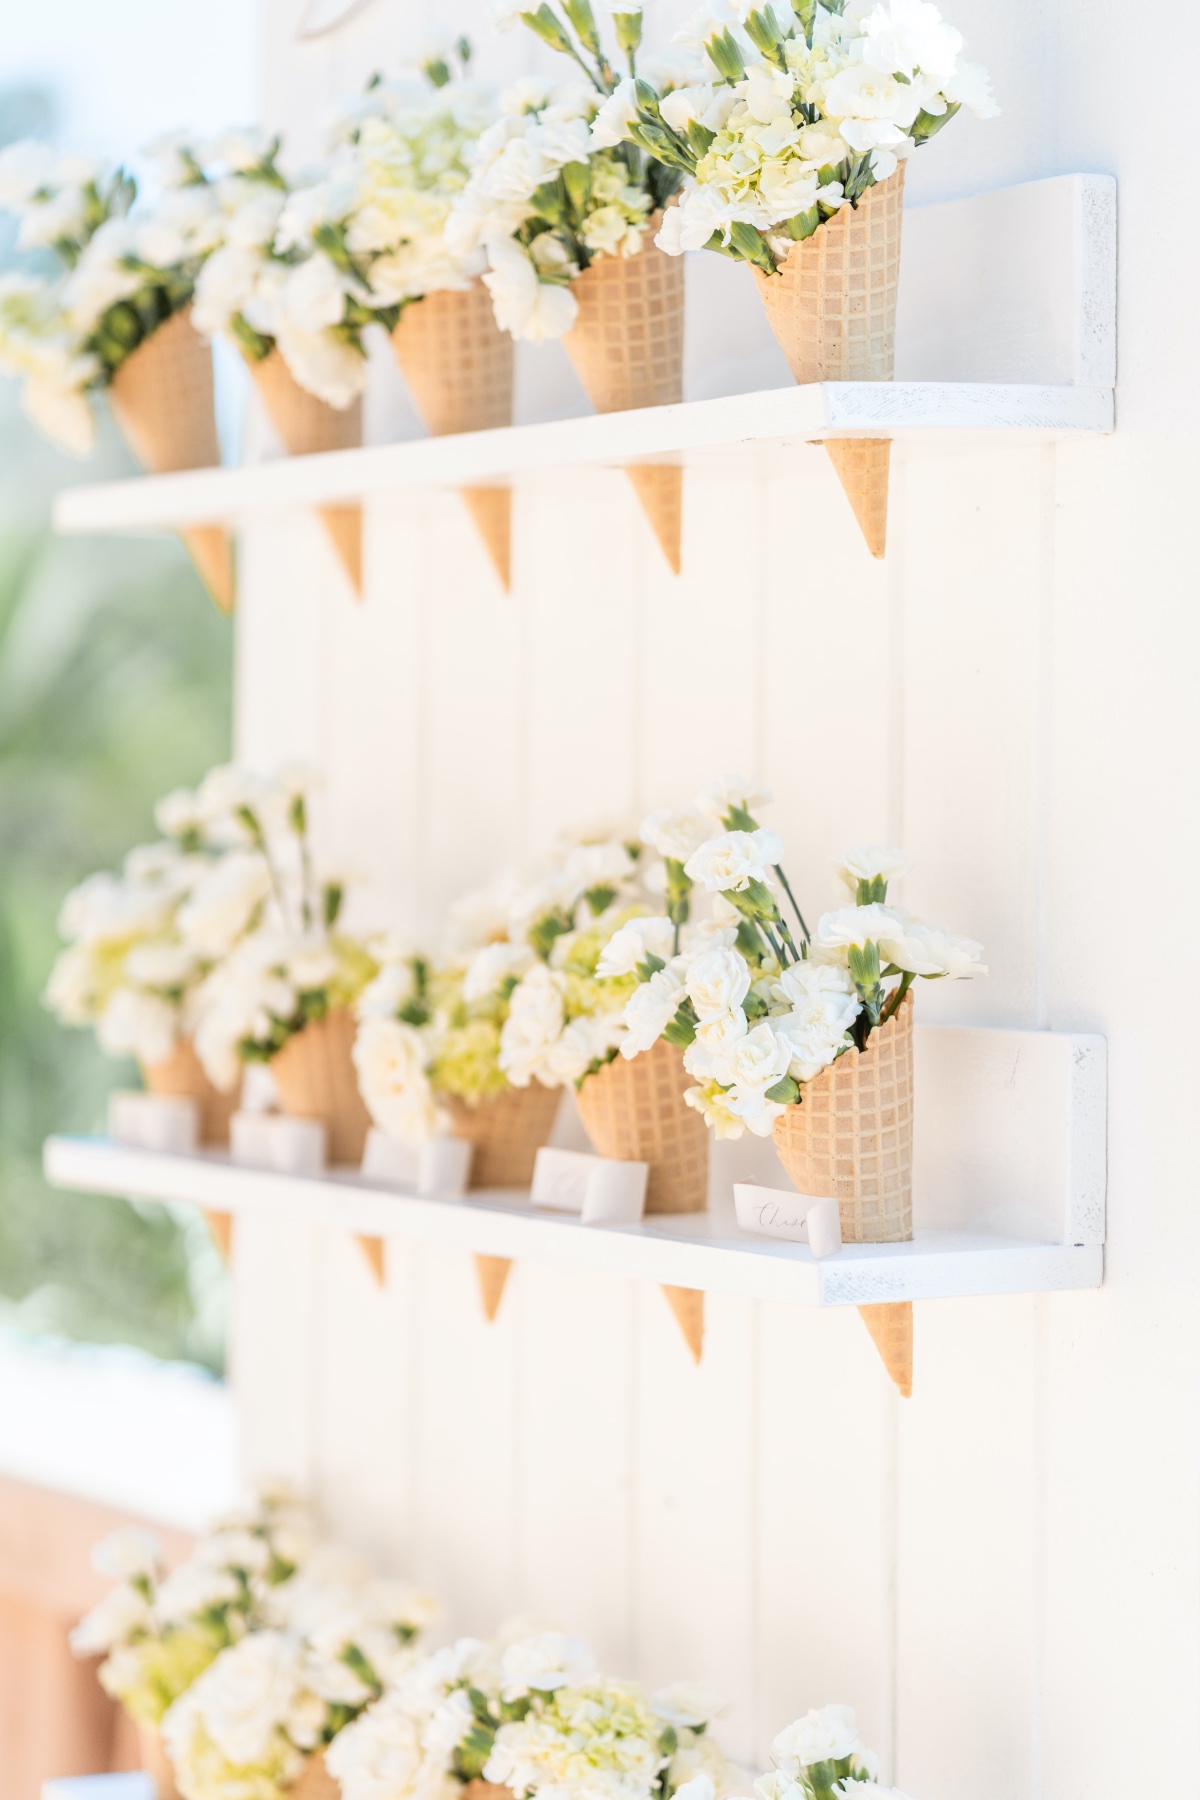 5 Tips for a Petite and Endlessly Beautiful Spring Wedding